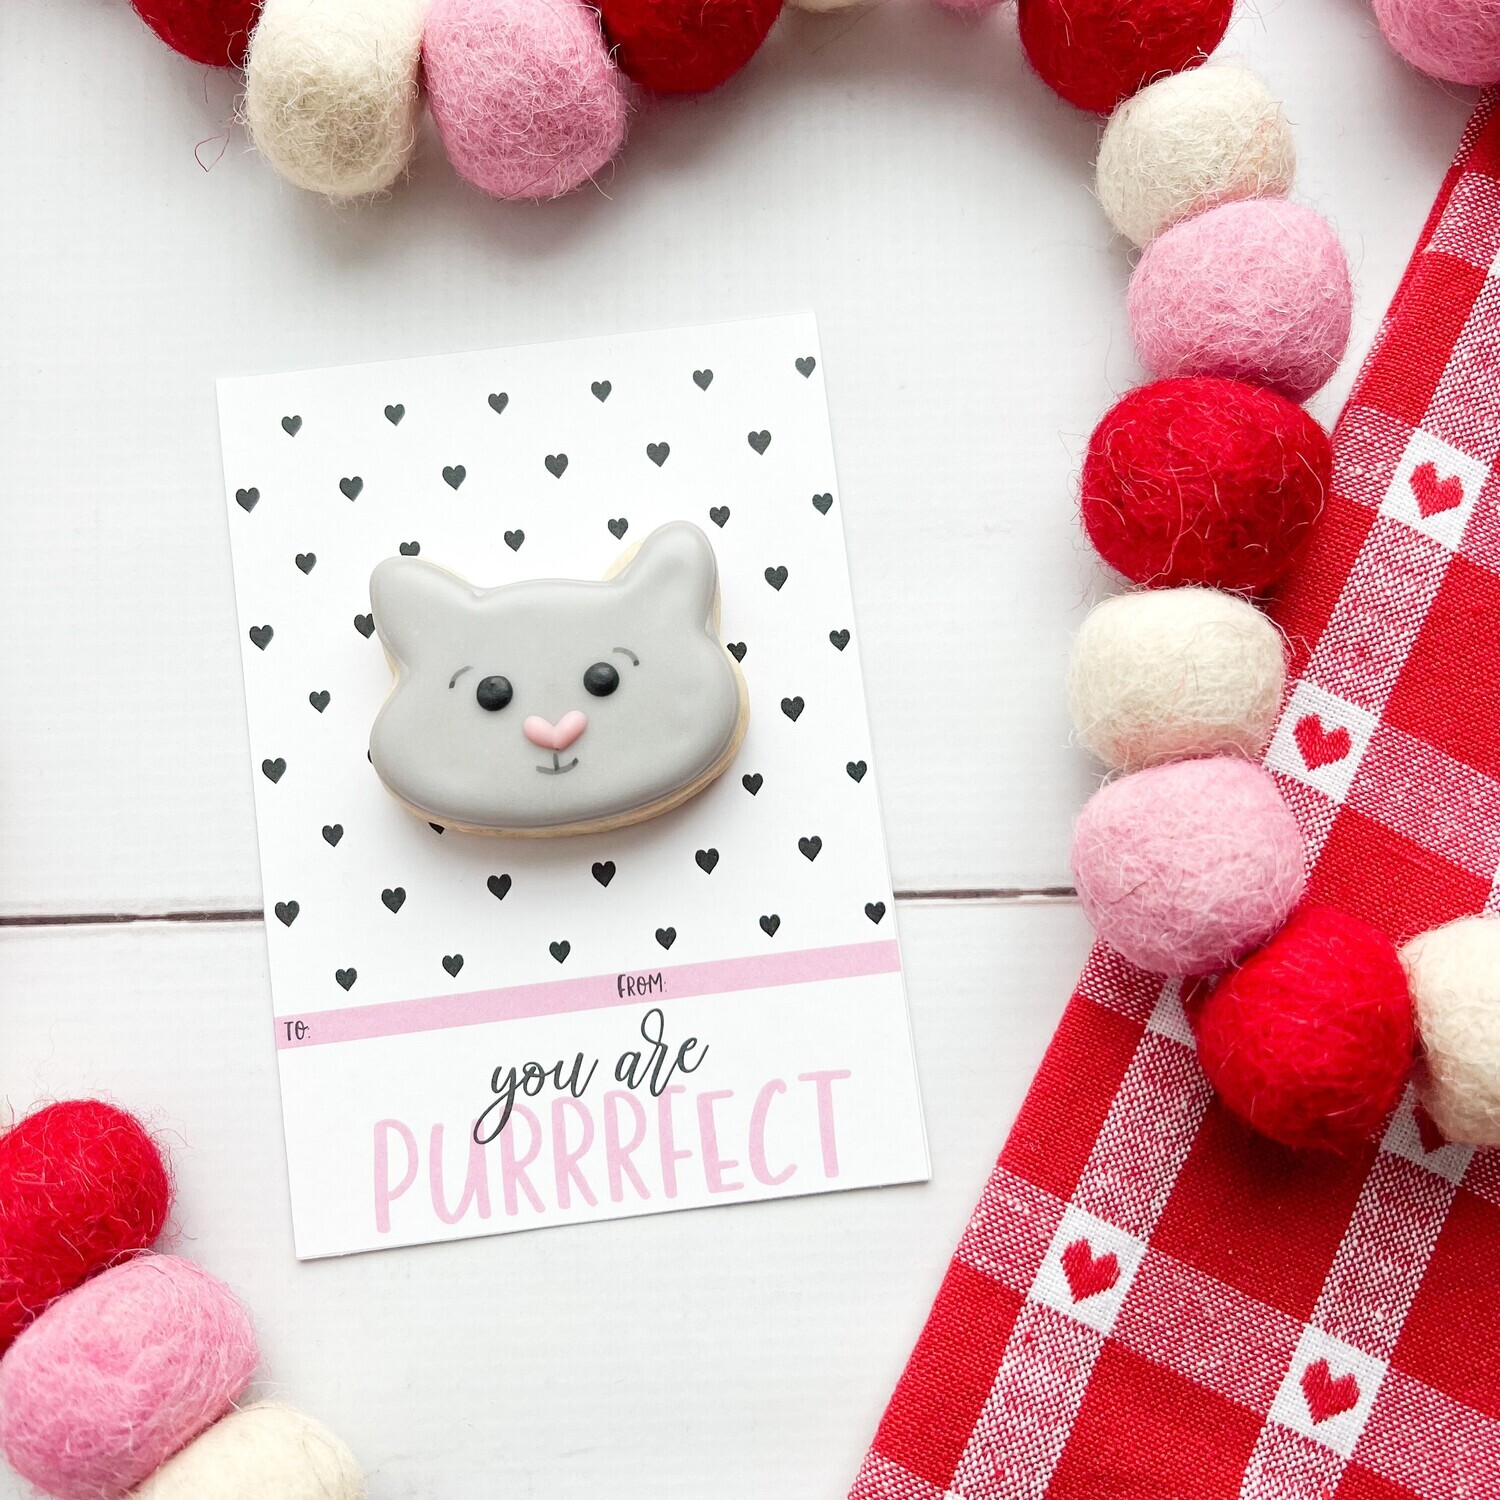 "You Are Purrrfect" Cookie Card